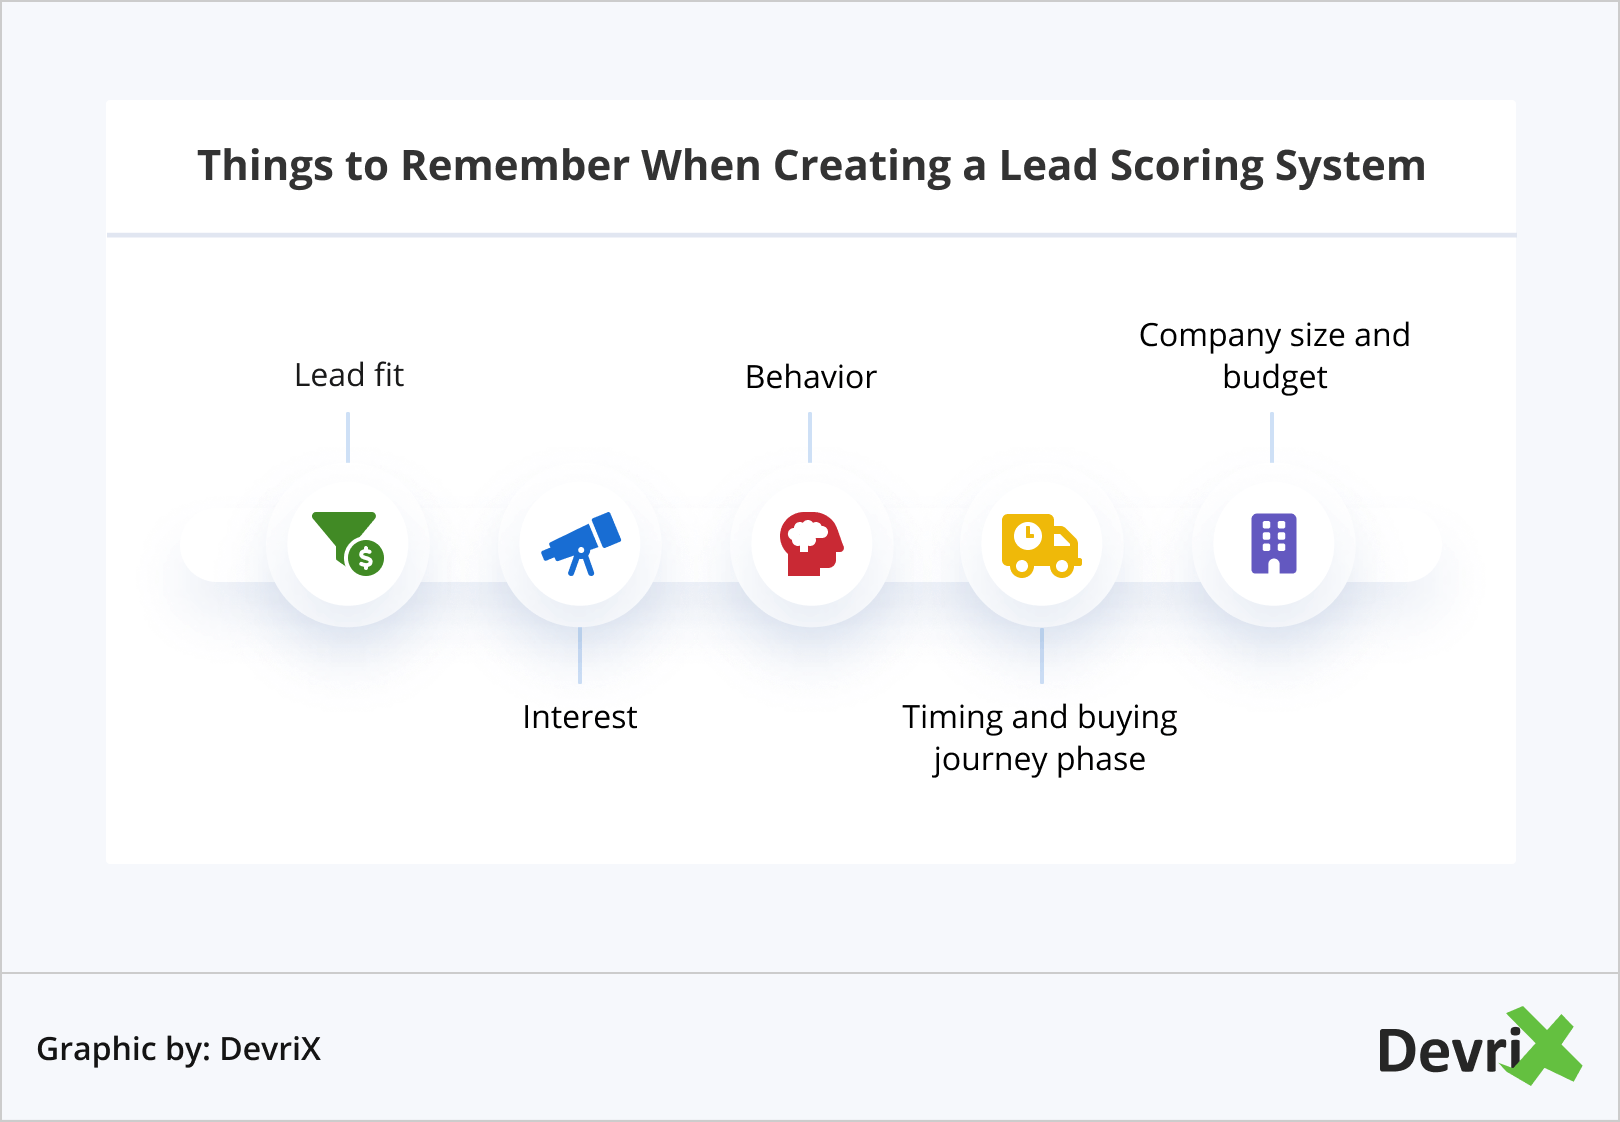 Things to Remember When Creating a Lead Scoring System